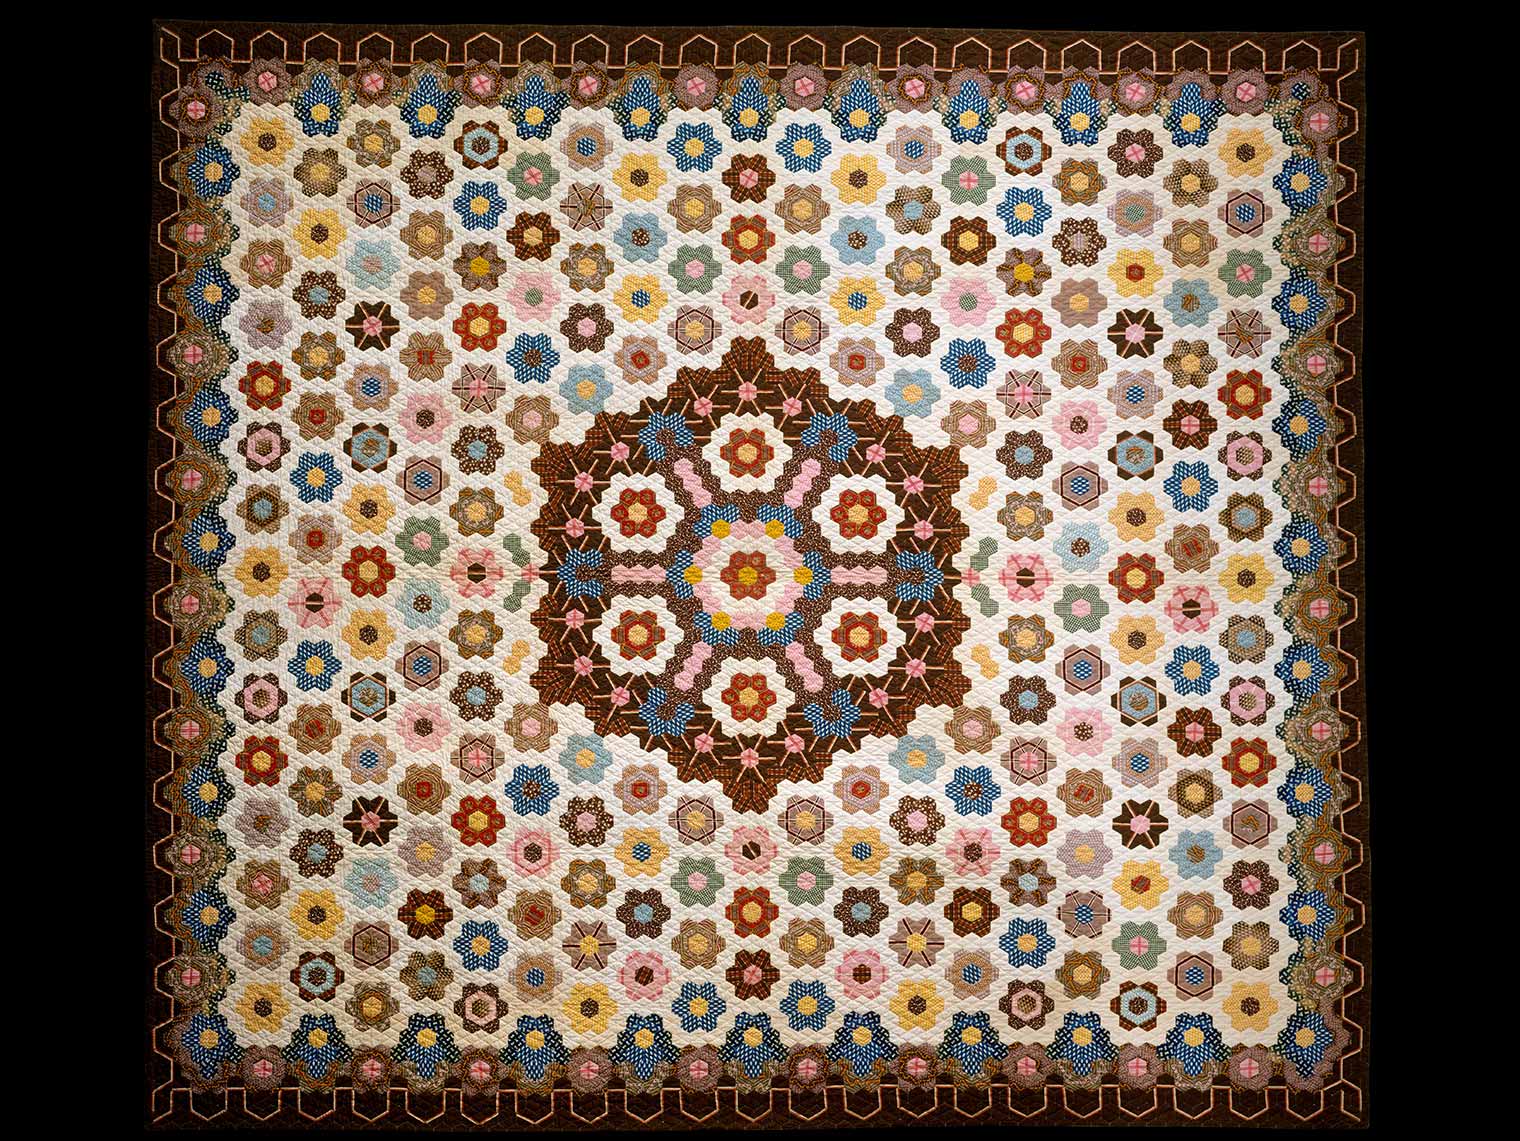 A rectangular quilt designed with colorful hexagonal shapes.